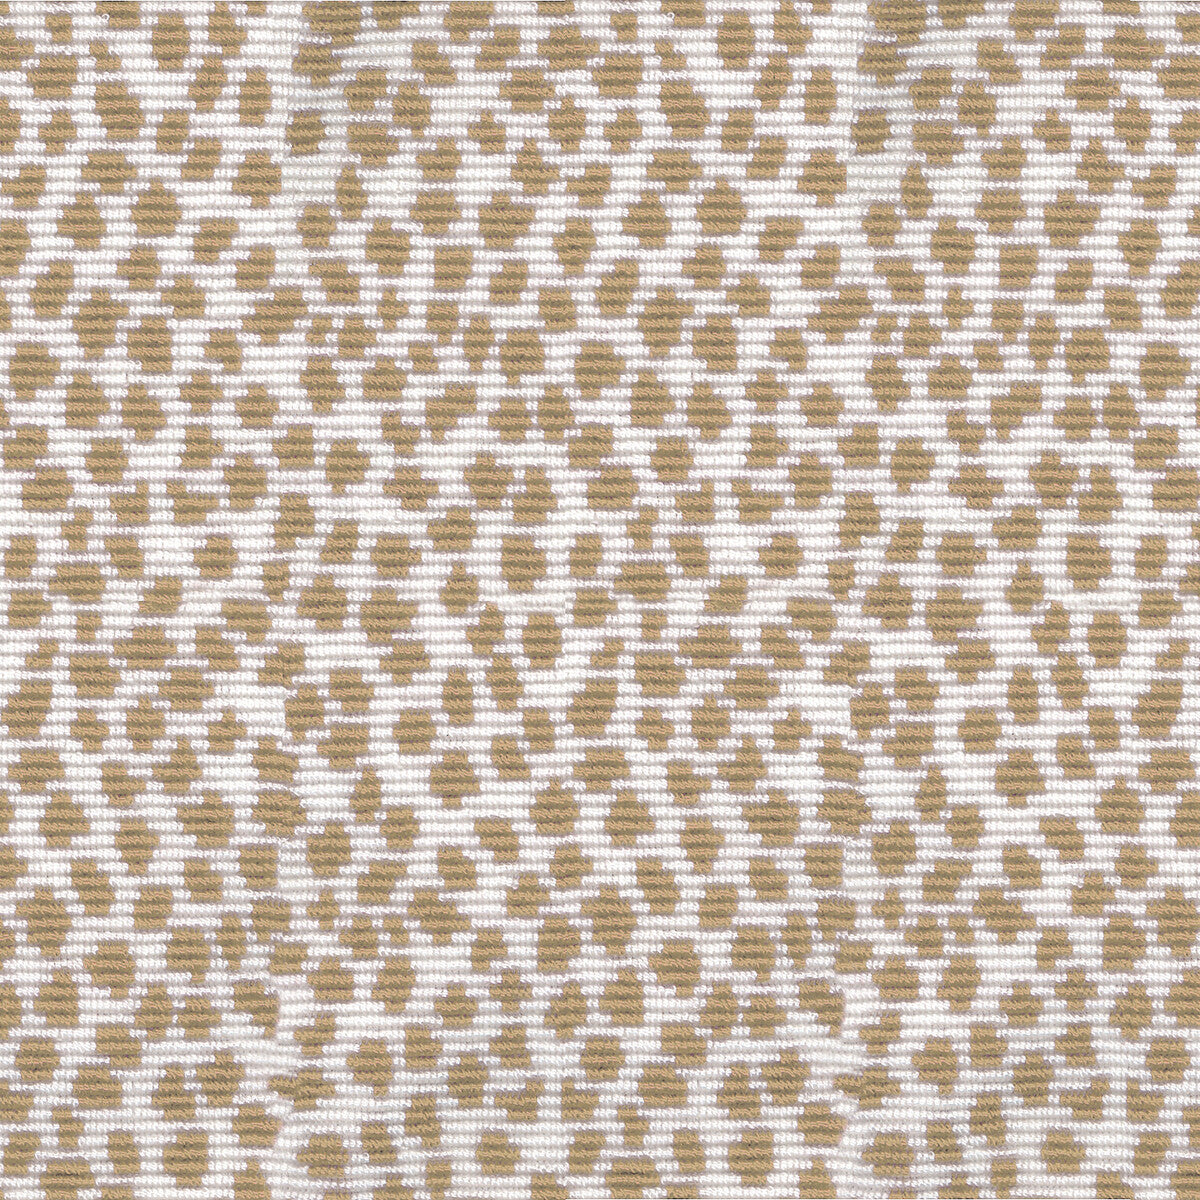 Graveson Woven fabric in tan color - pattern 8017104.116.0 - by Brunschwig &amp; Fils in the Durance collection